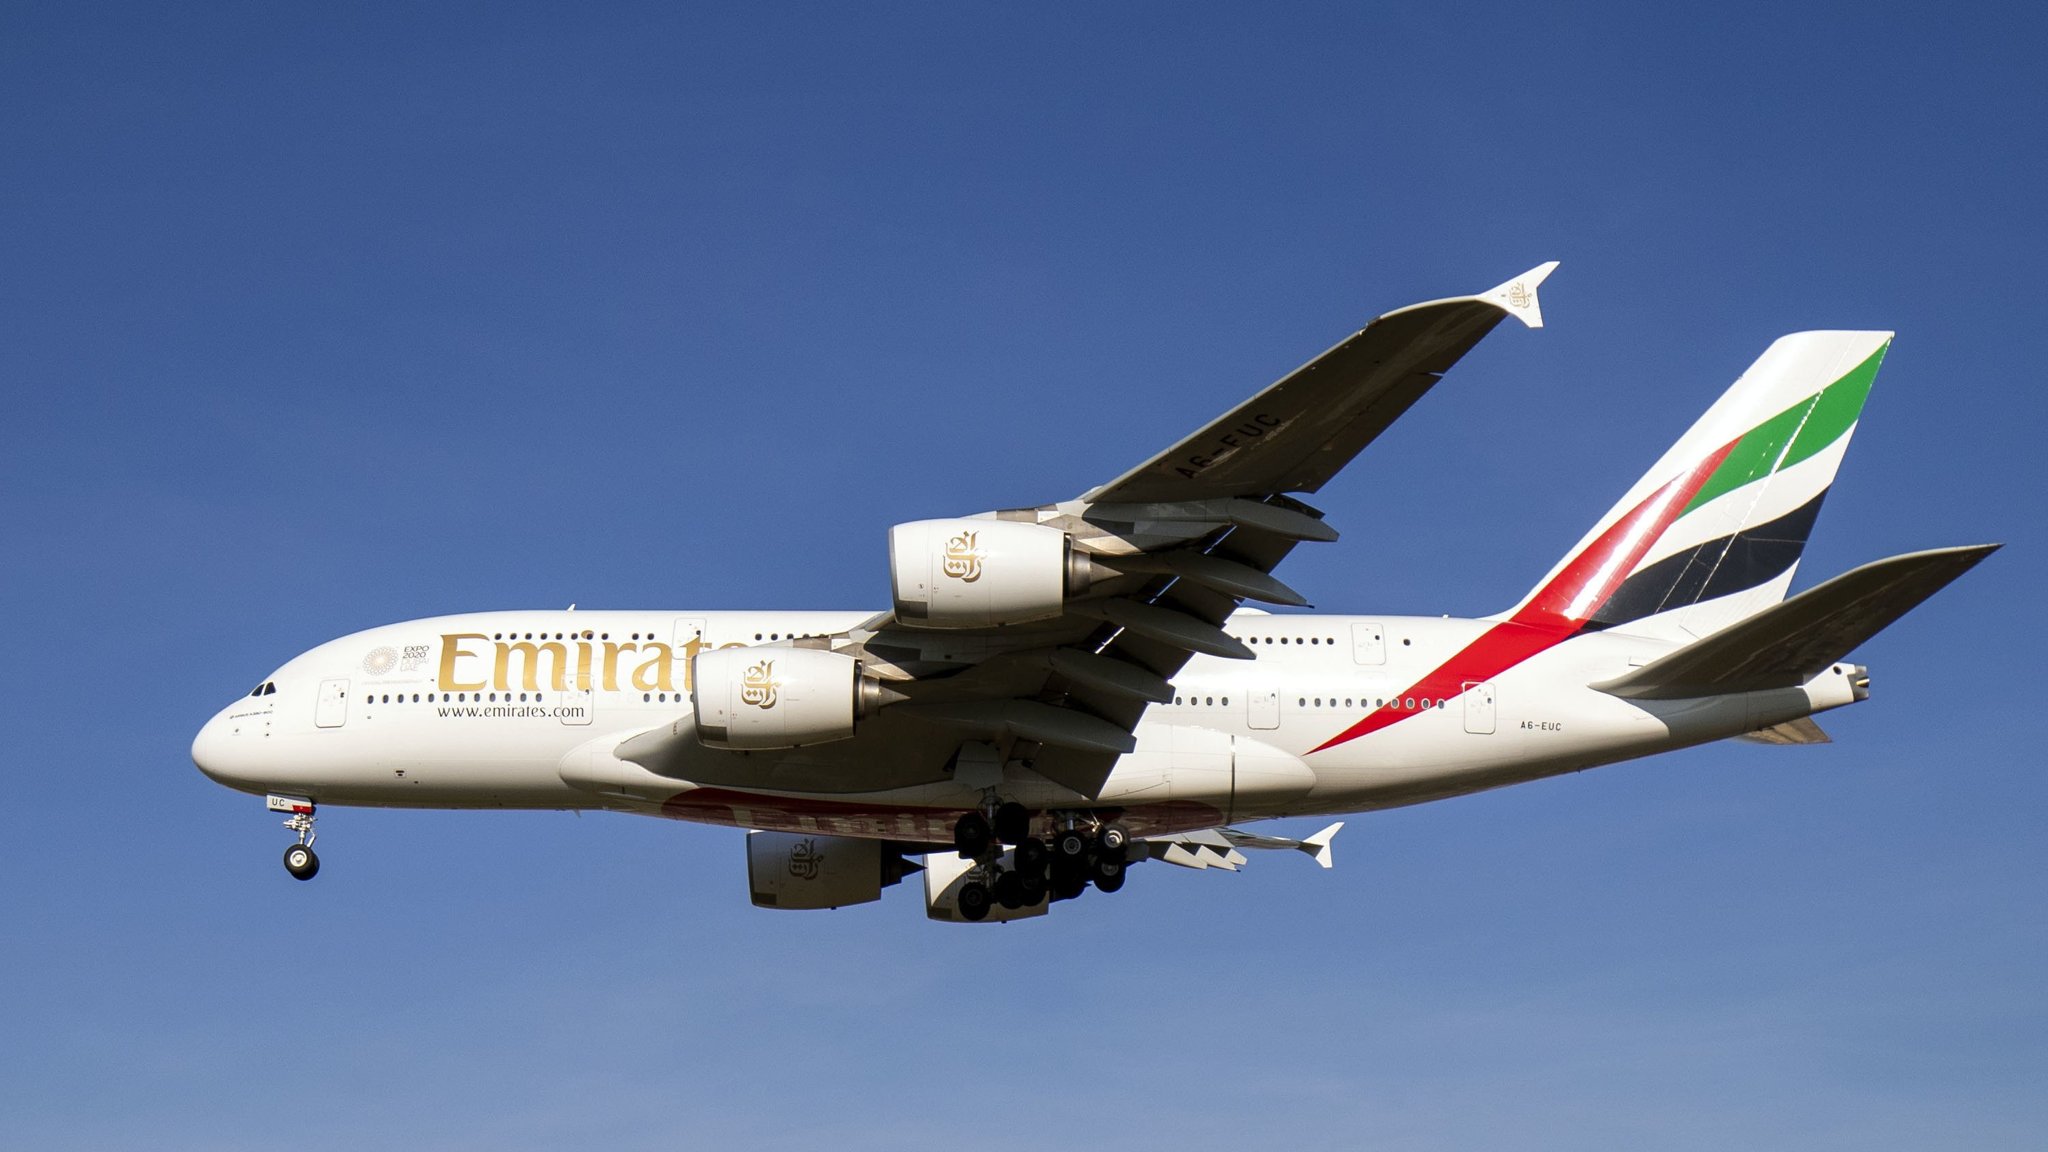 Why The Airbus A380 Was Grounded - Airbus A380 , HD Wallpaper & Backgrounds